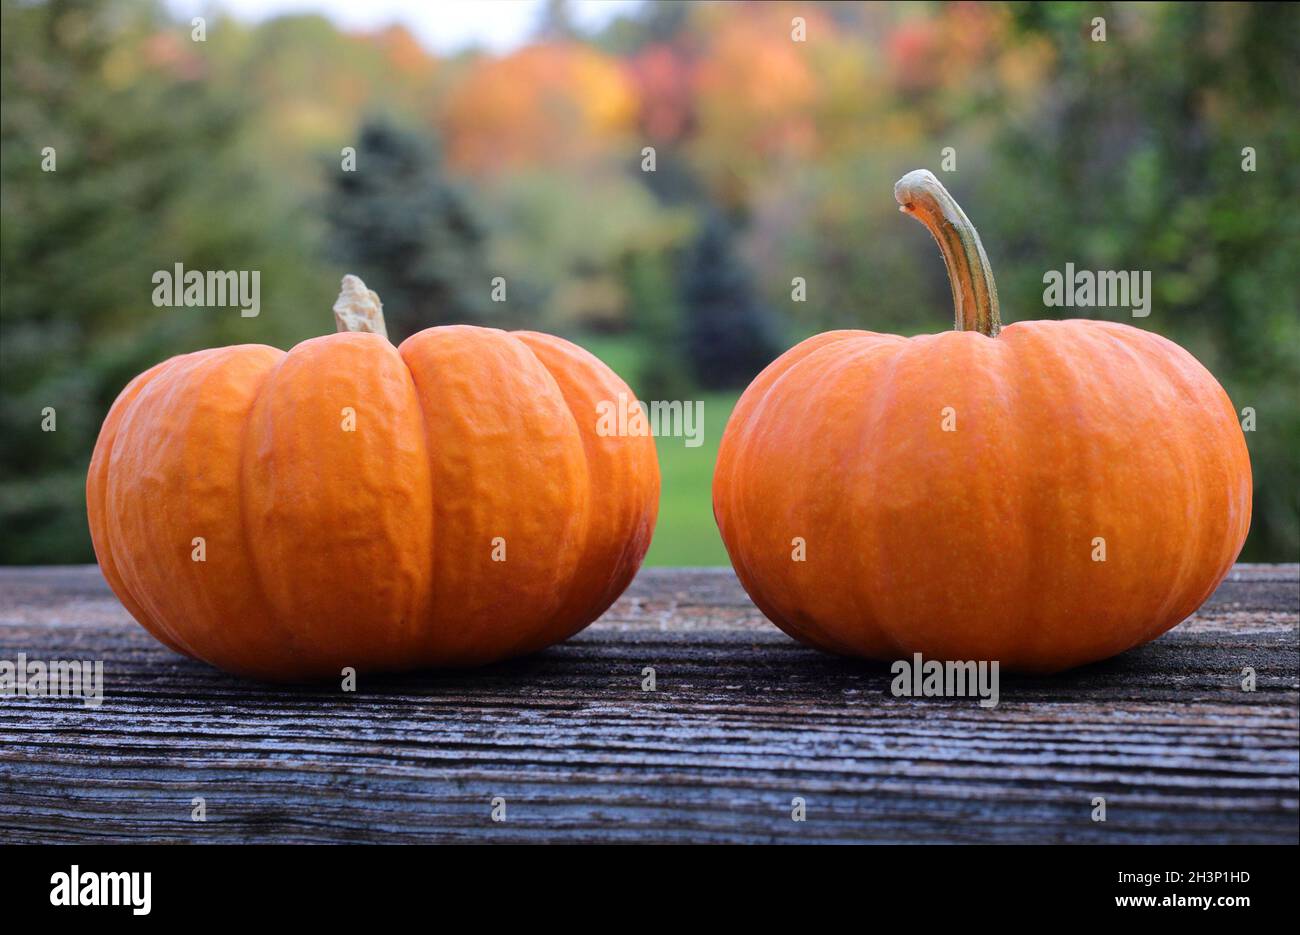 Two small orange pumpkins on a brown wood deck railing with pretty red, orange and green fall/autumn foliage in the background Stock Photo